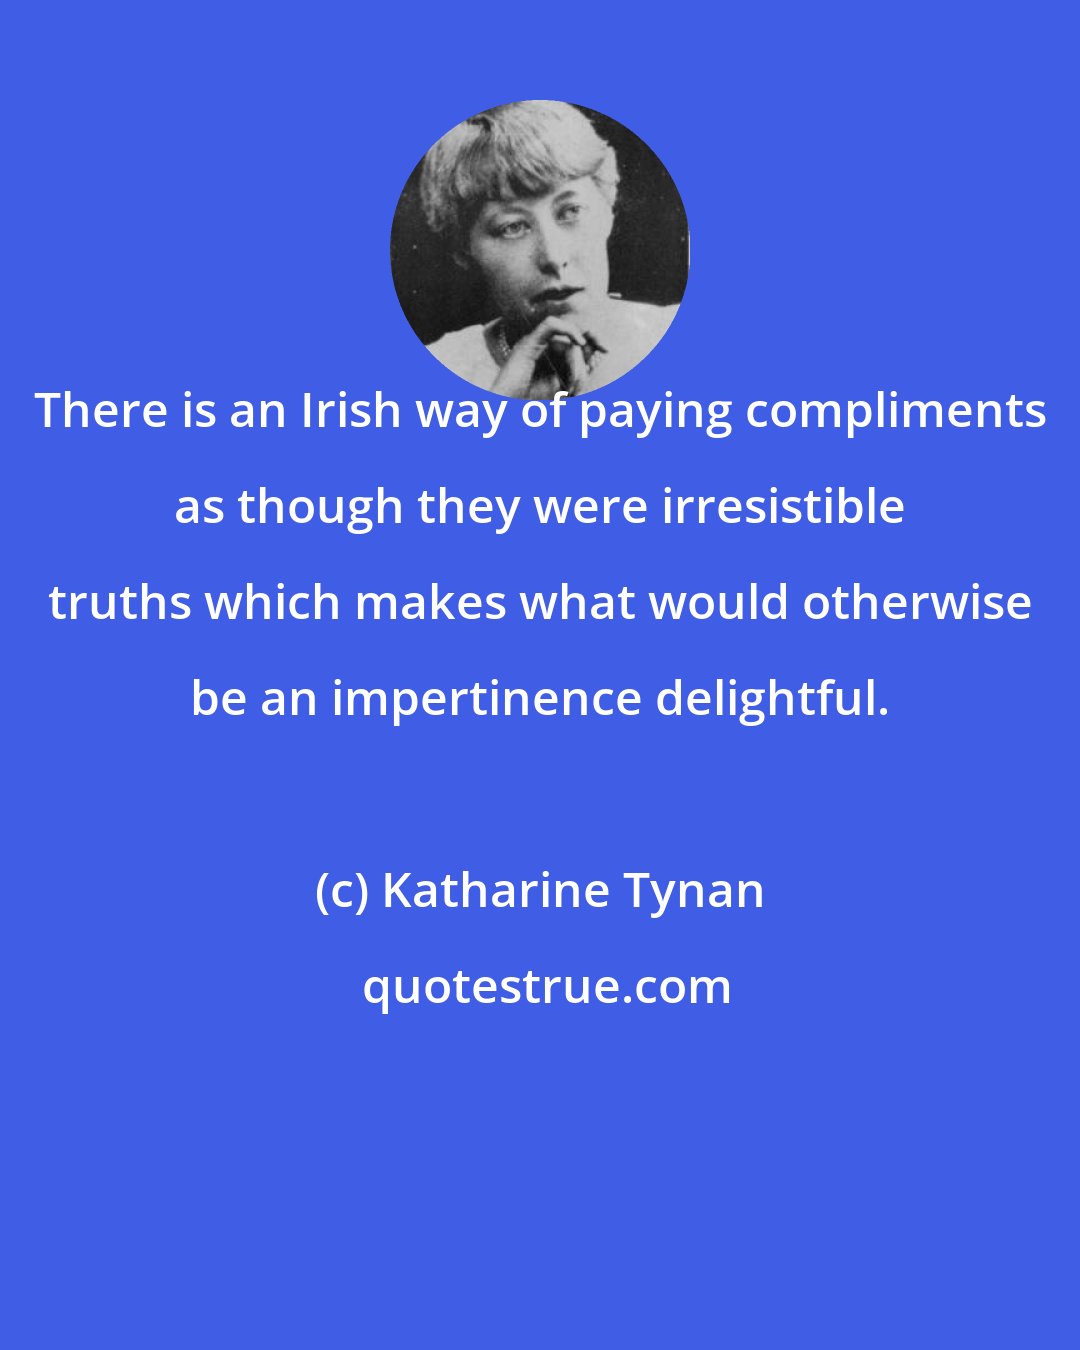 Katharine Tynan: There is an Irish way of paying compliments as though they were irresistible truths which makes what would otherwise be an impertinence delightful.